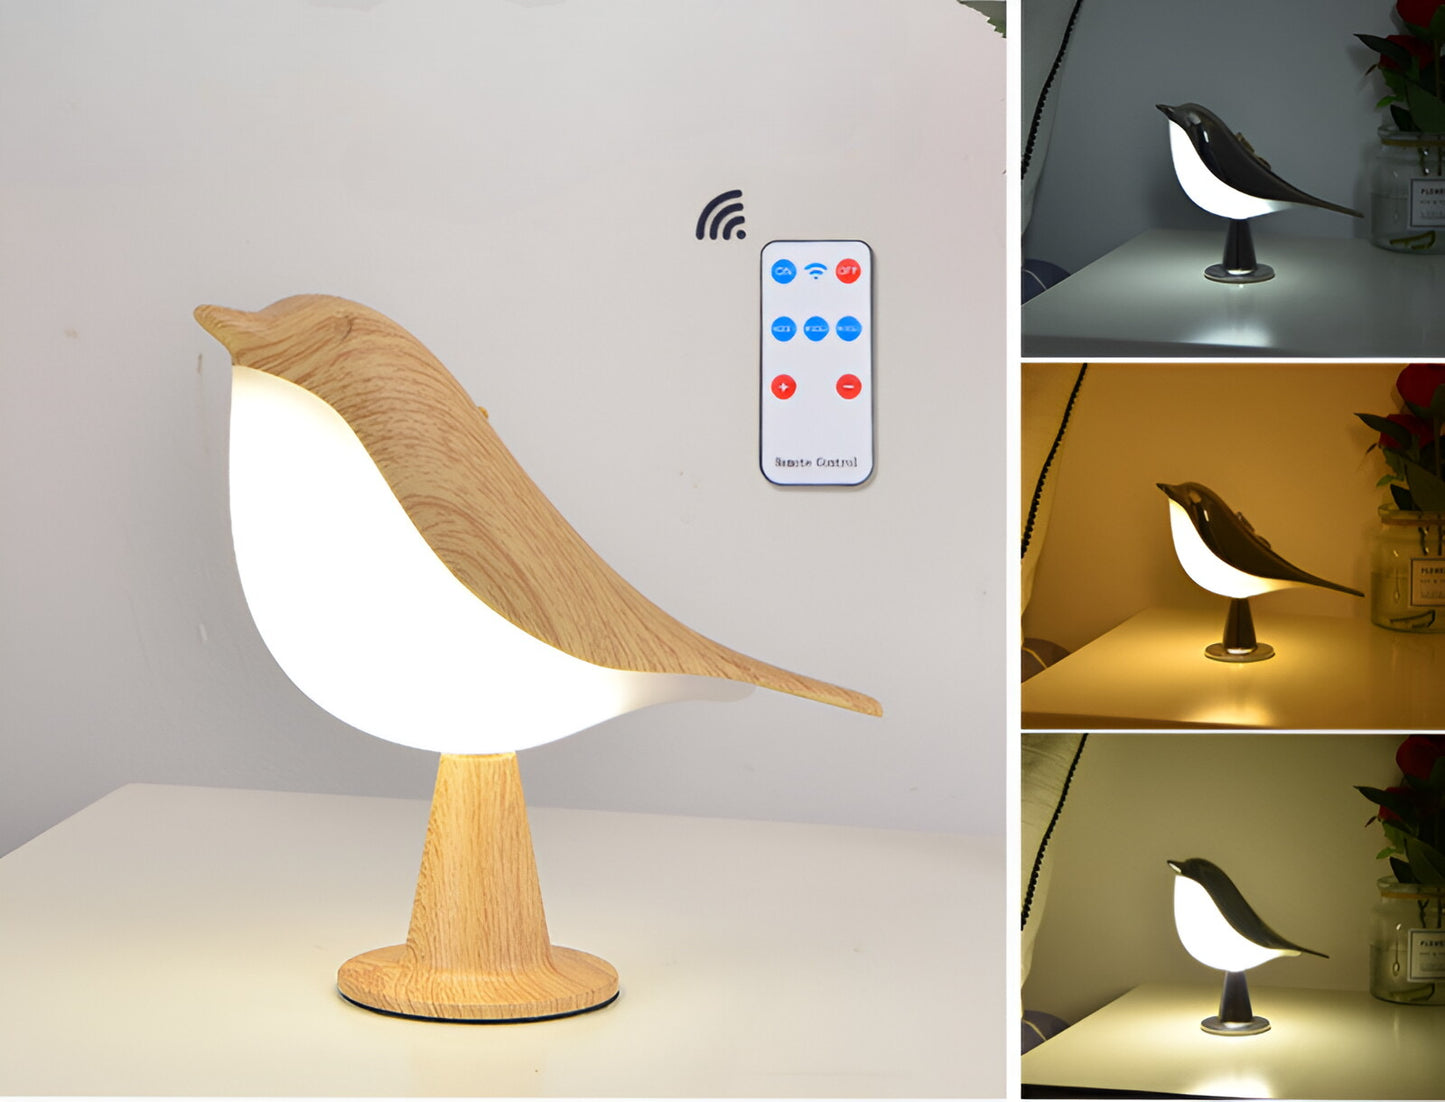 Bird Aromatherapy Decor Lamp, 8.46 x 2.36 x 5.91 Inches, Bedroom Bedside Bird Night Light with Remote Control, Rechargeable Touch 3-Color Ambient Table Lamp, Children's Night Light Gift